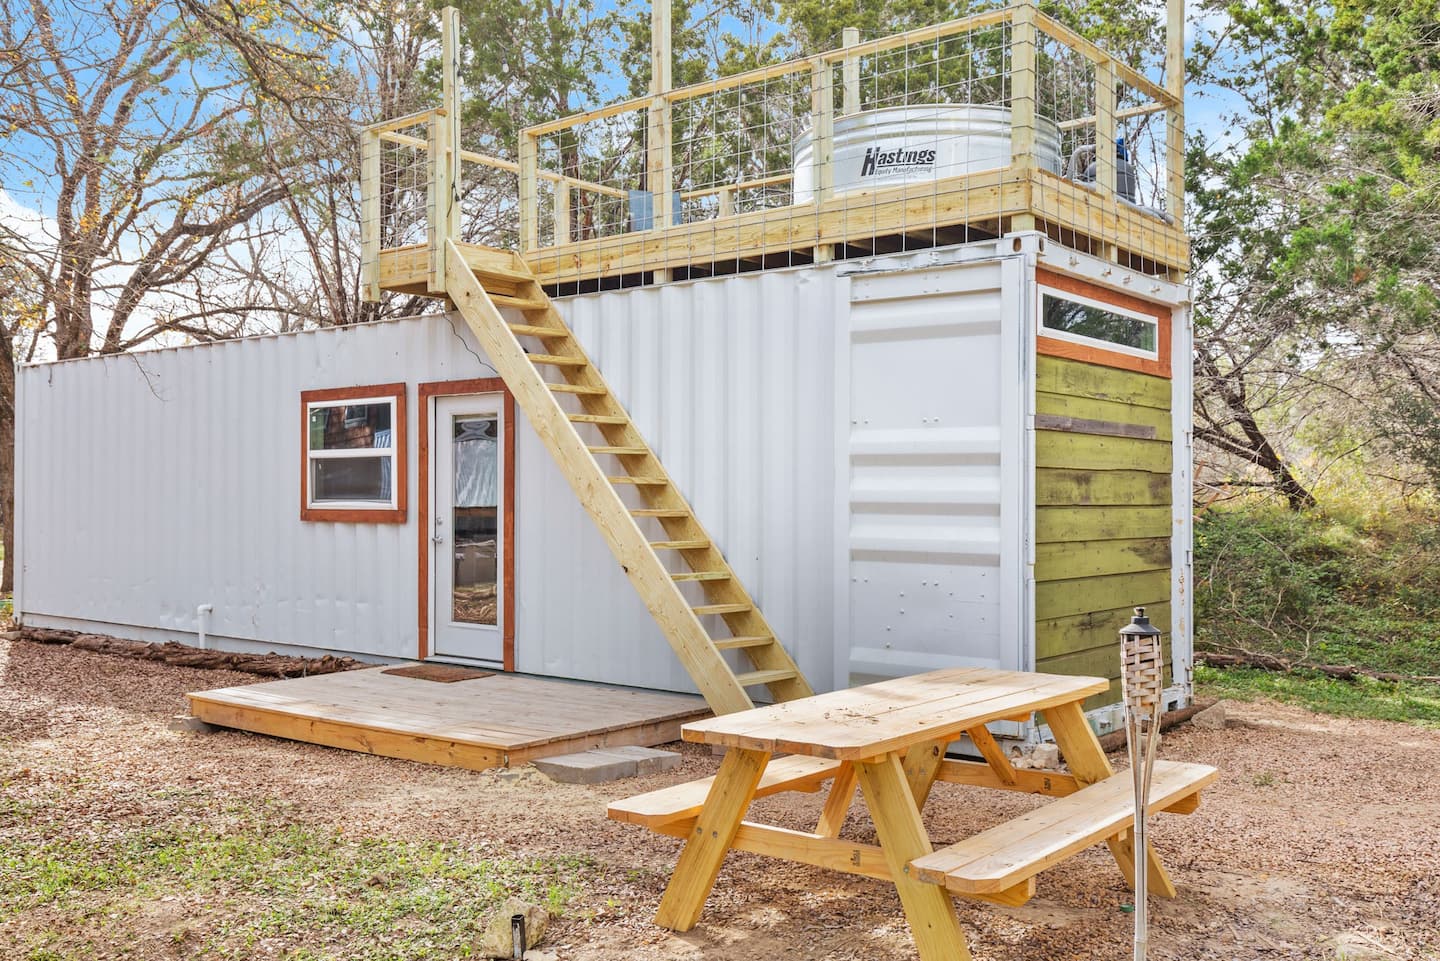 Shipping container home, one of the best Airbnbs in Texas, with a rooftop pool